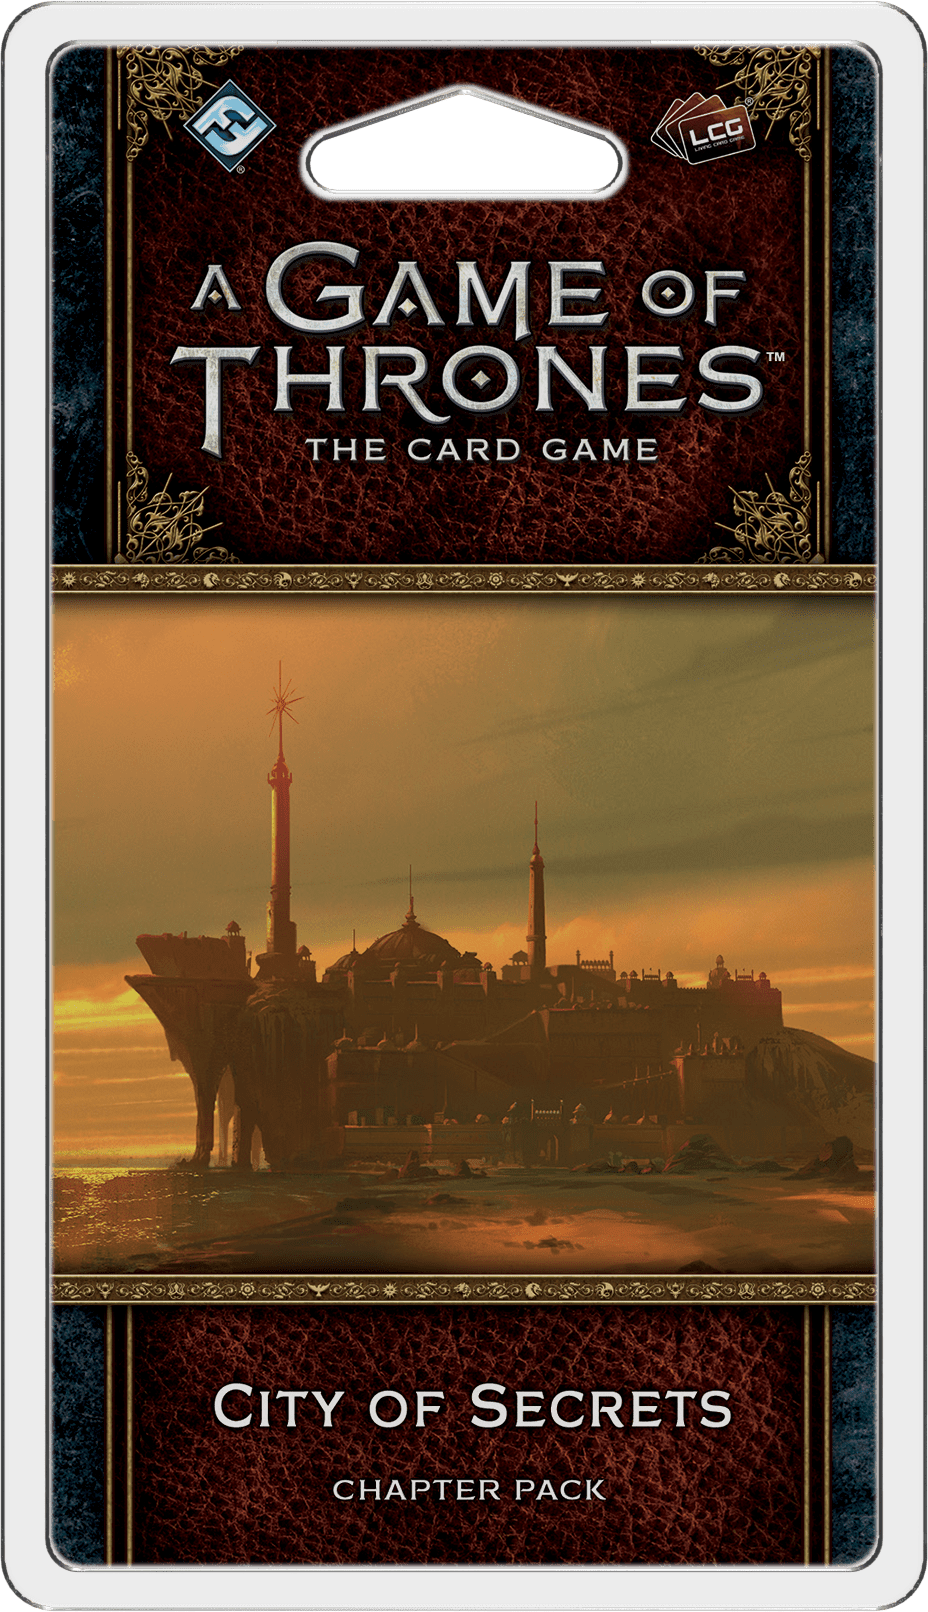 A Game of Thrones: The Card Game (Second Edition) – City of Secrets